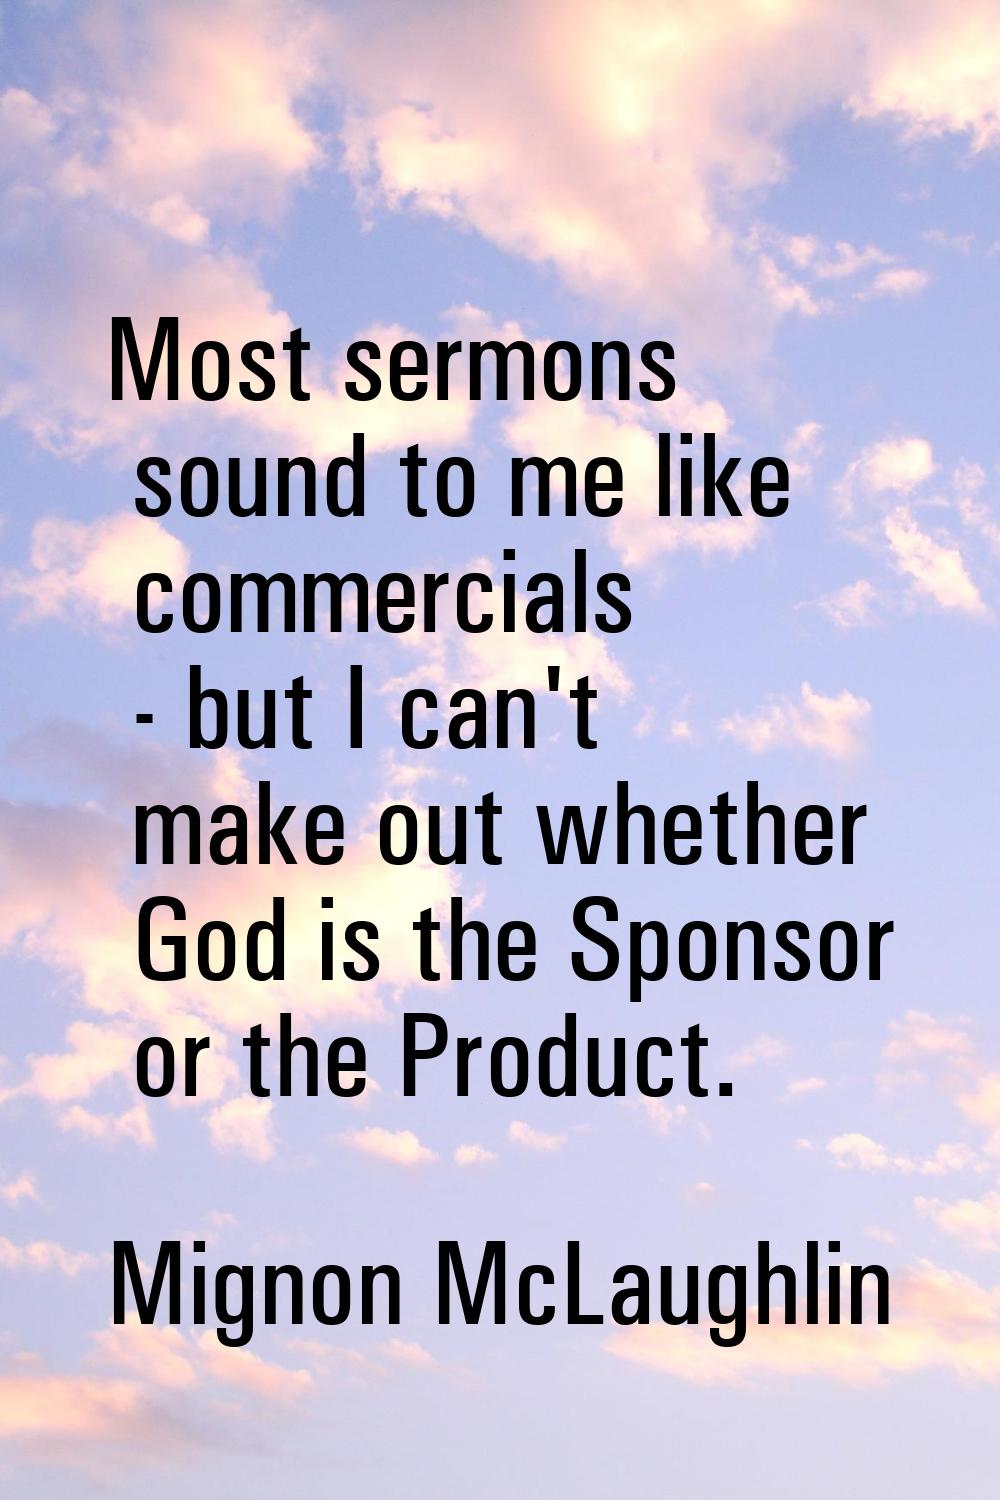 Most sermons sound to me like commercials - but I can't make out whether God is the Sponsor or the 